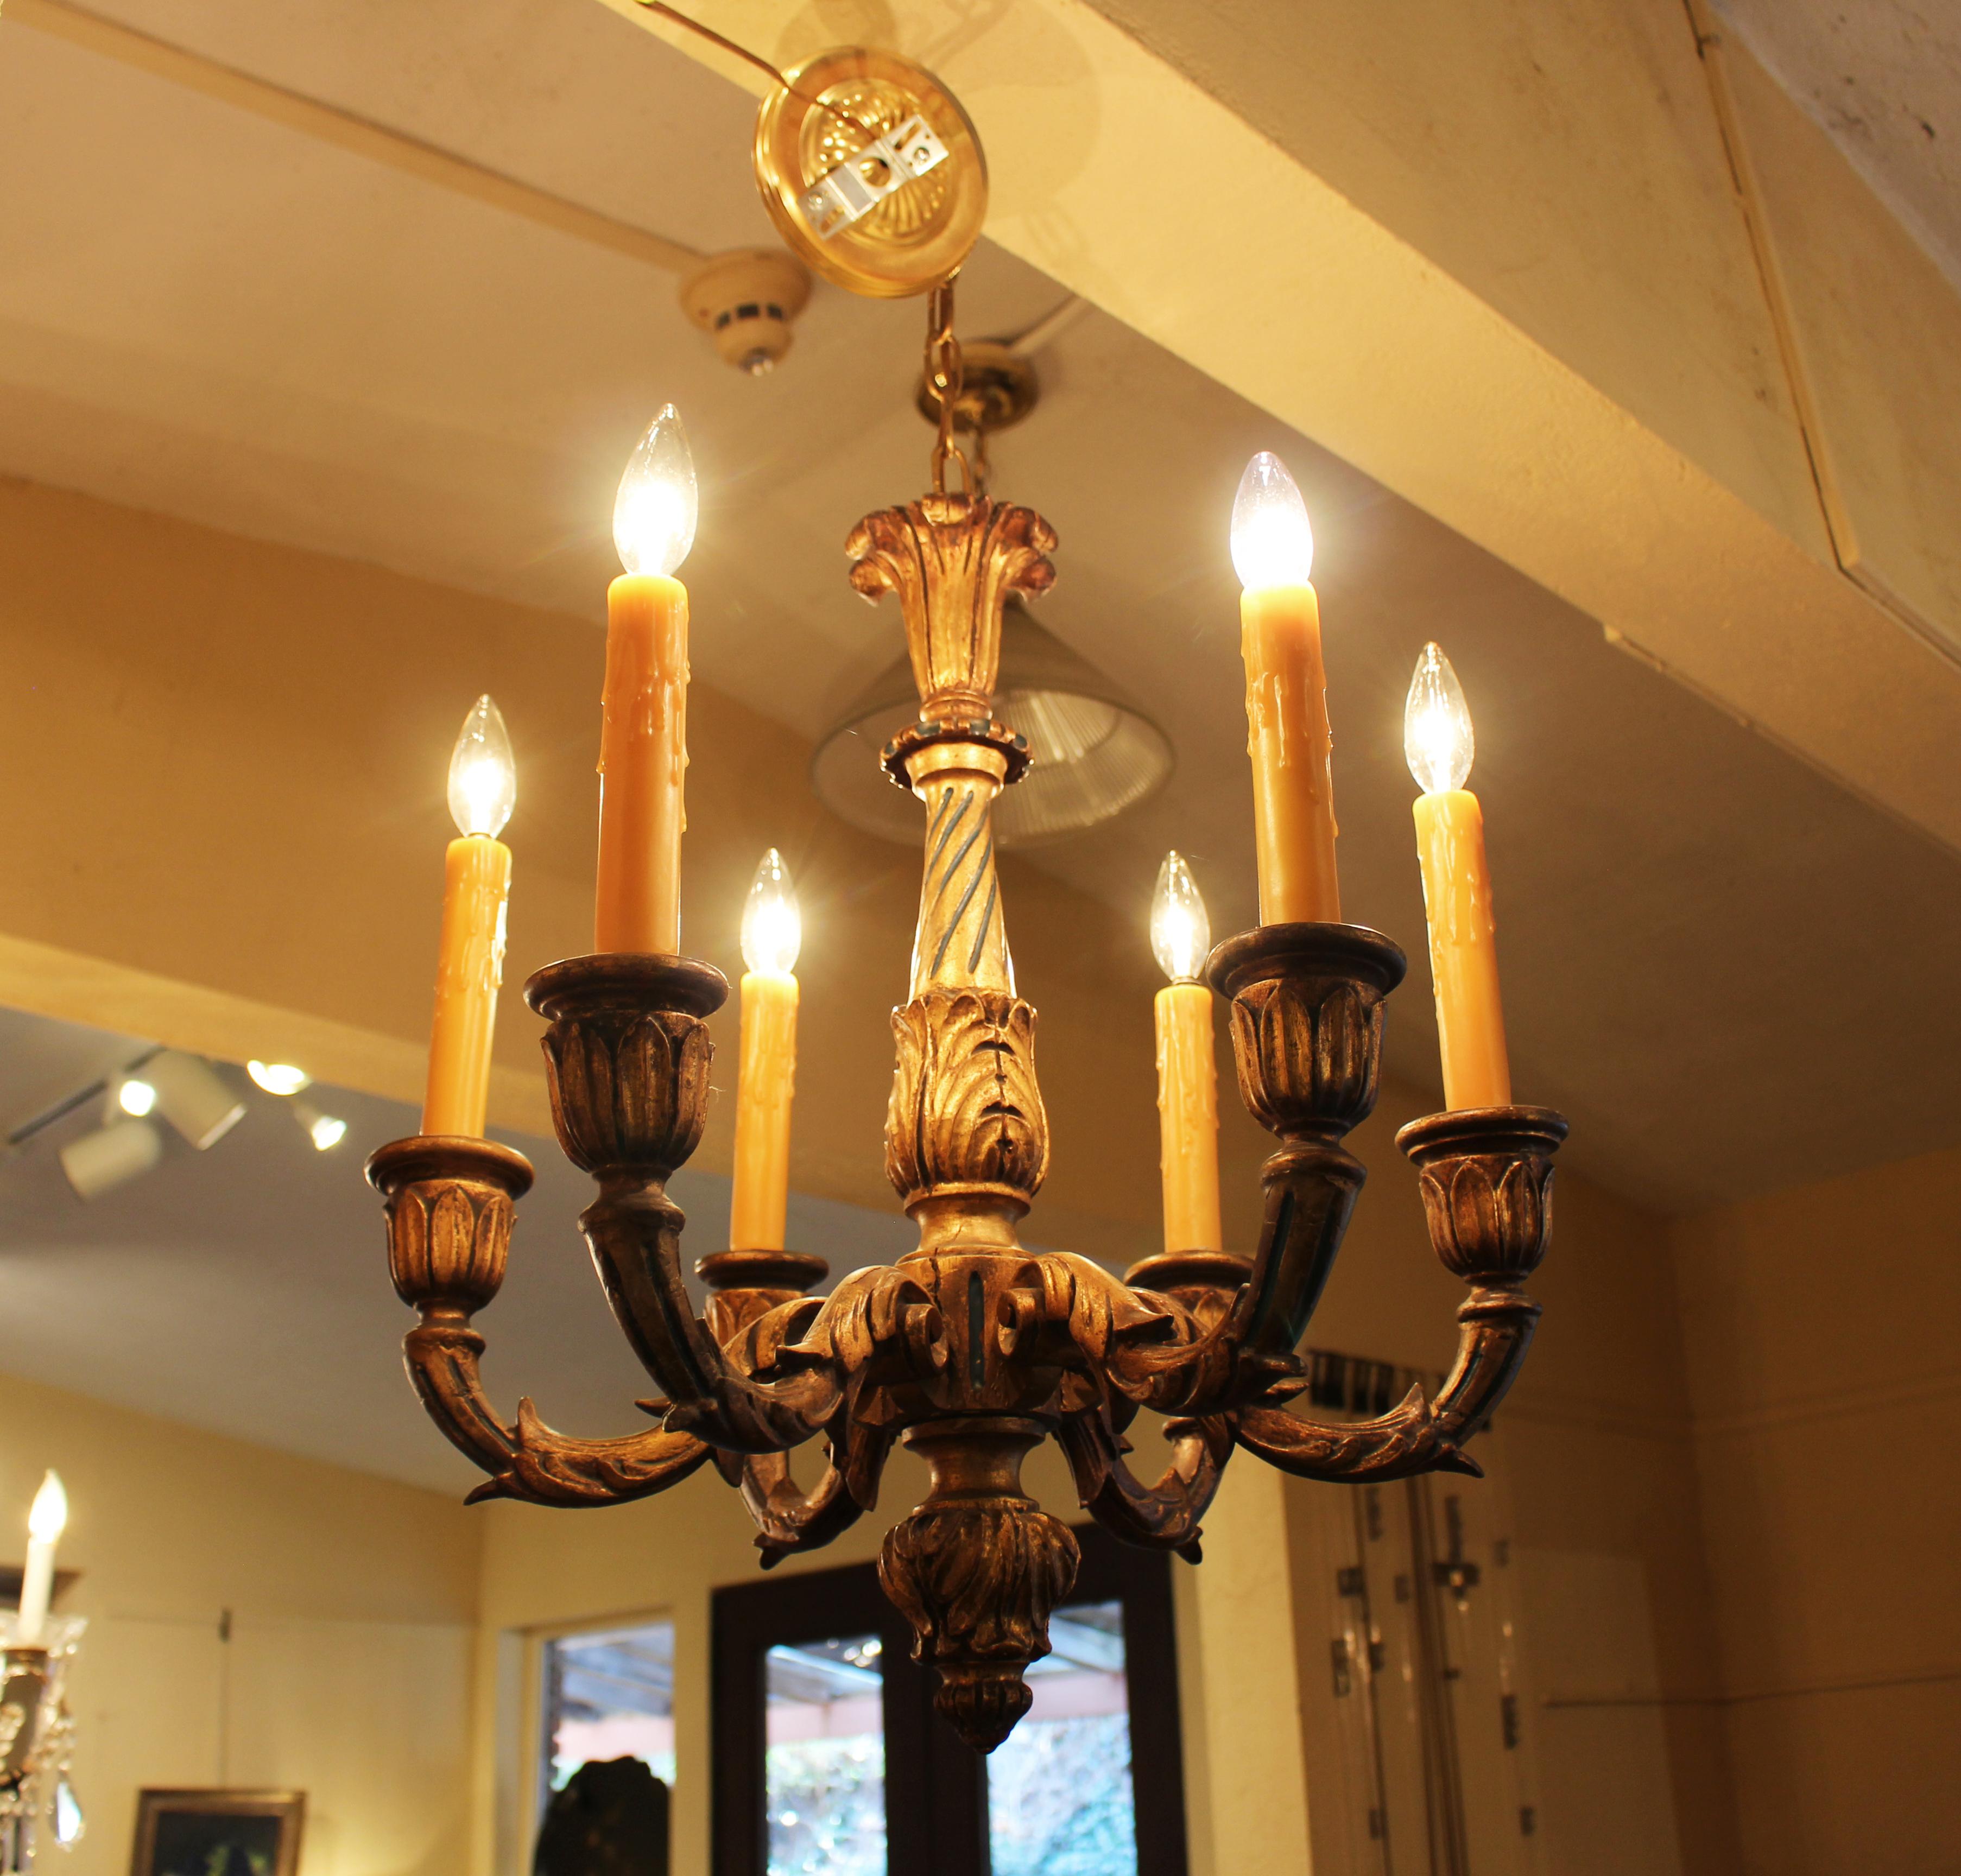 Circa 1900 6-light chandelier - guilt and blue accented carved wood. Probably French, in Renaissance revival style. Acquired by Albert Hadley for 1060 Fifth Ave, NYC. 20 3/4